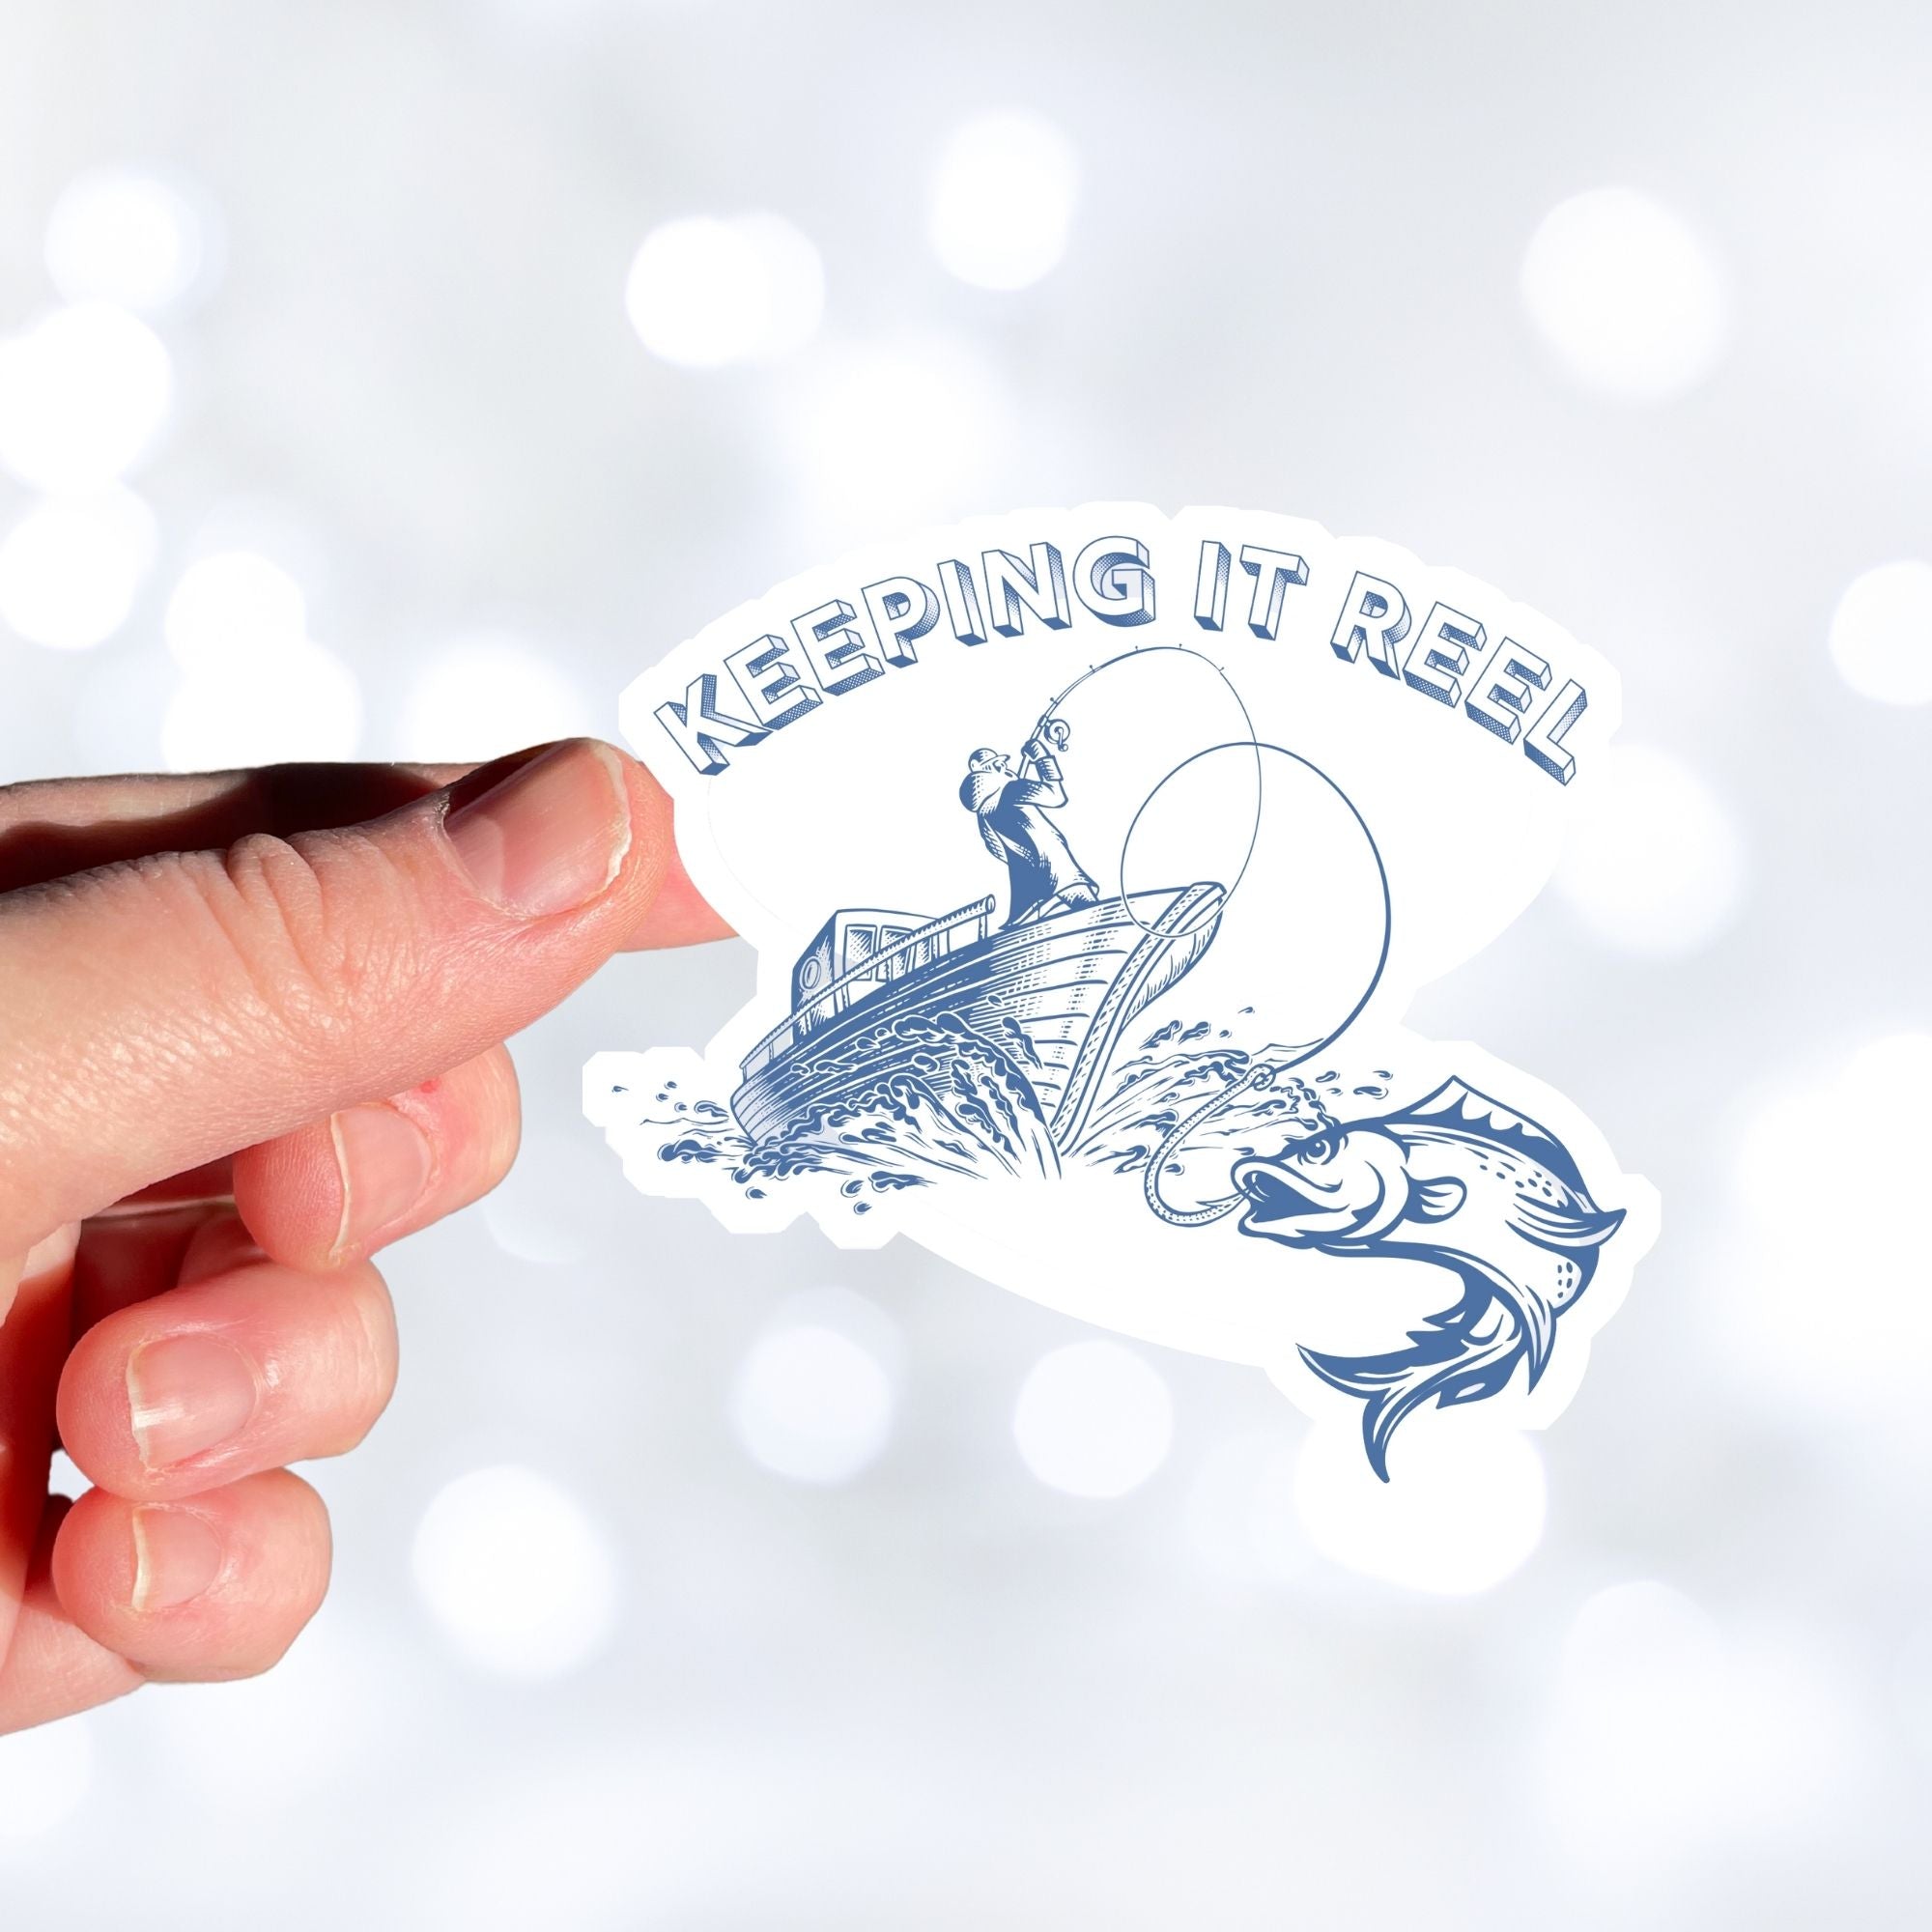 Love fishing? Then this individual die-cut sticker of a fisherperson with one on the line is for you! This image shows a hand holding the Keeping it Reel sticker.